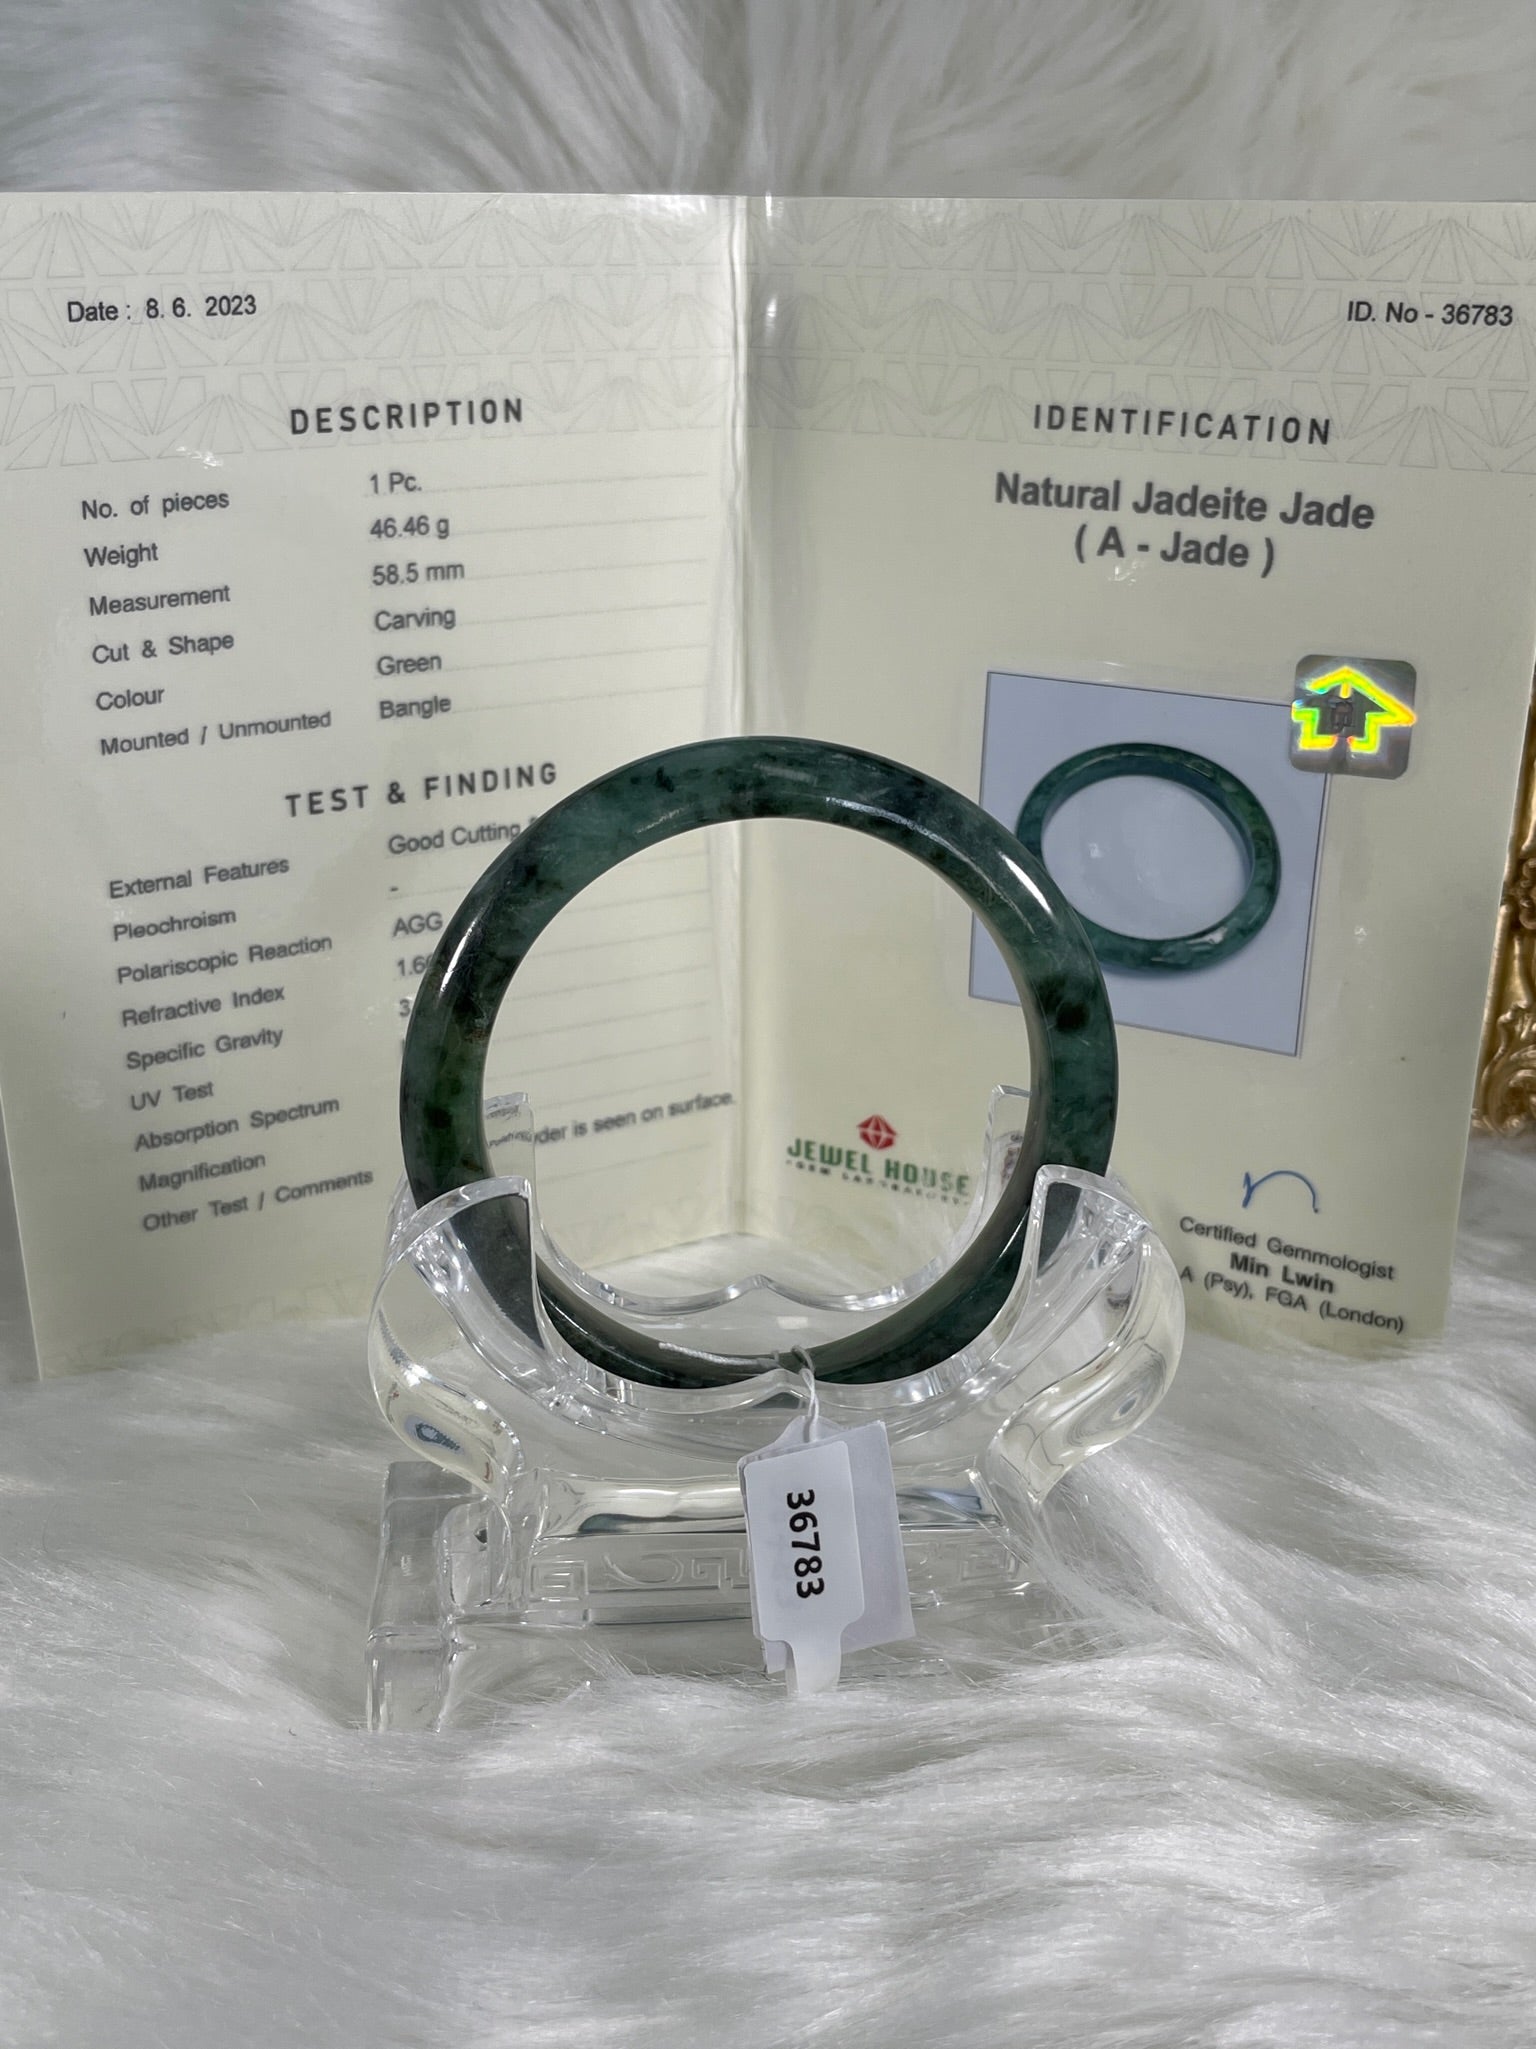 Grade A Natural Jade Bangle with certificate #36783